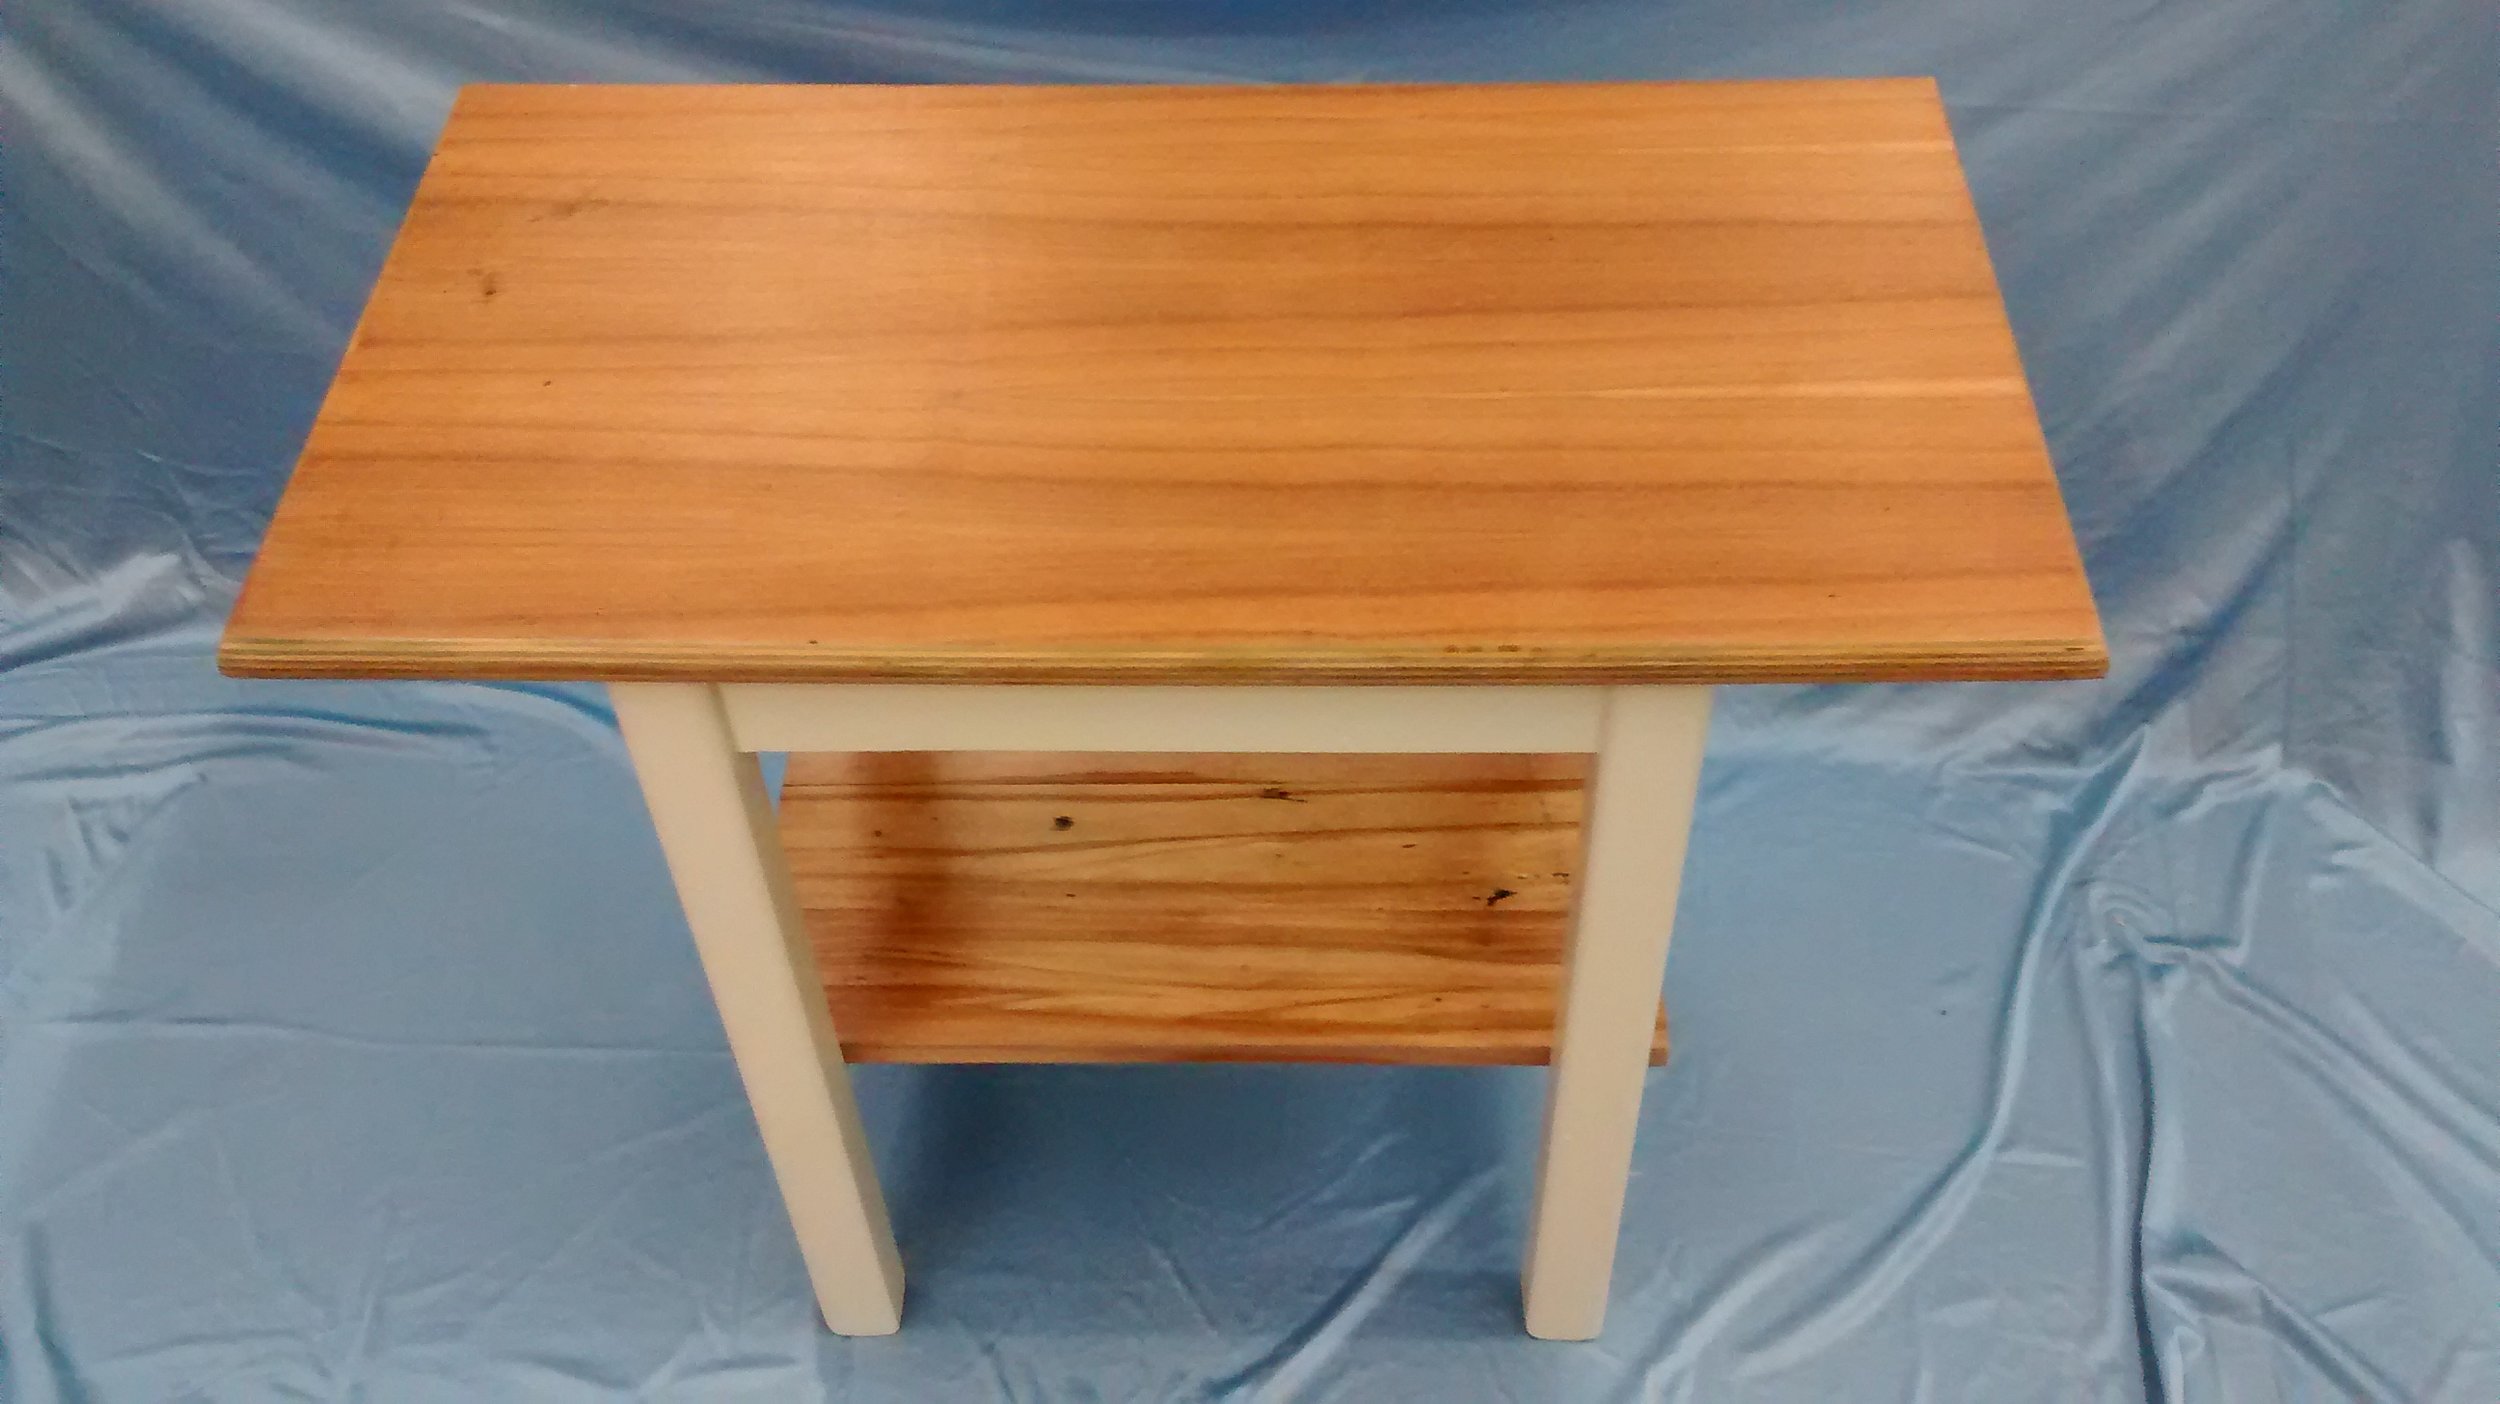 Upcycled End or Side Table with Reclaimed Wood